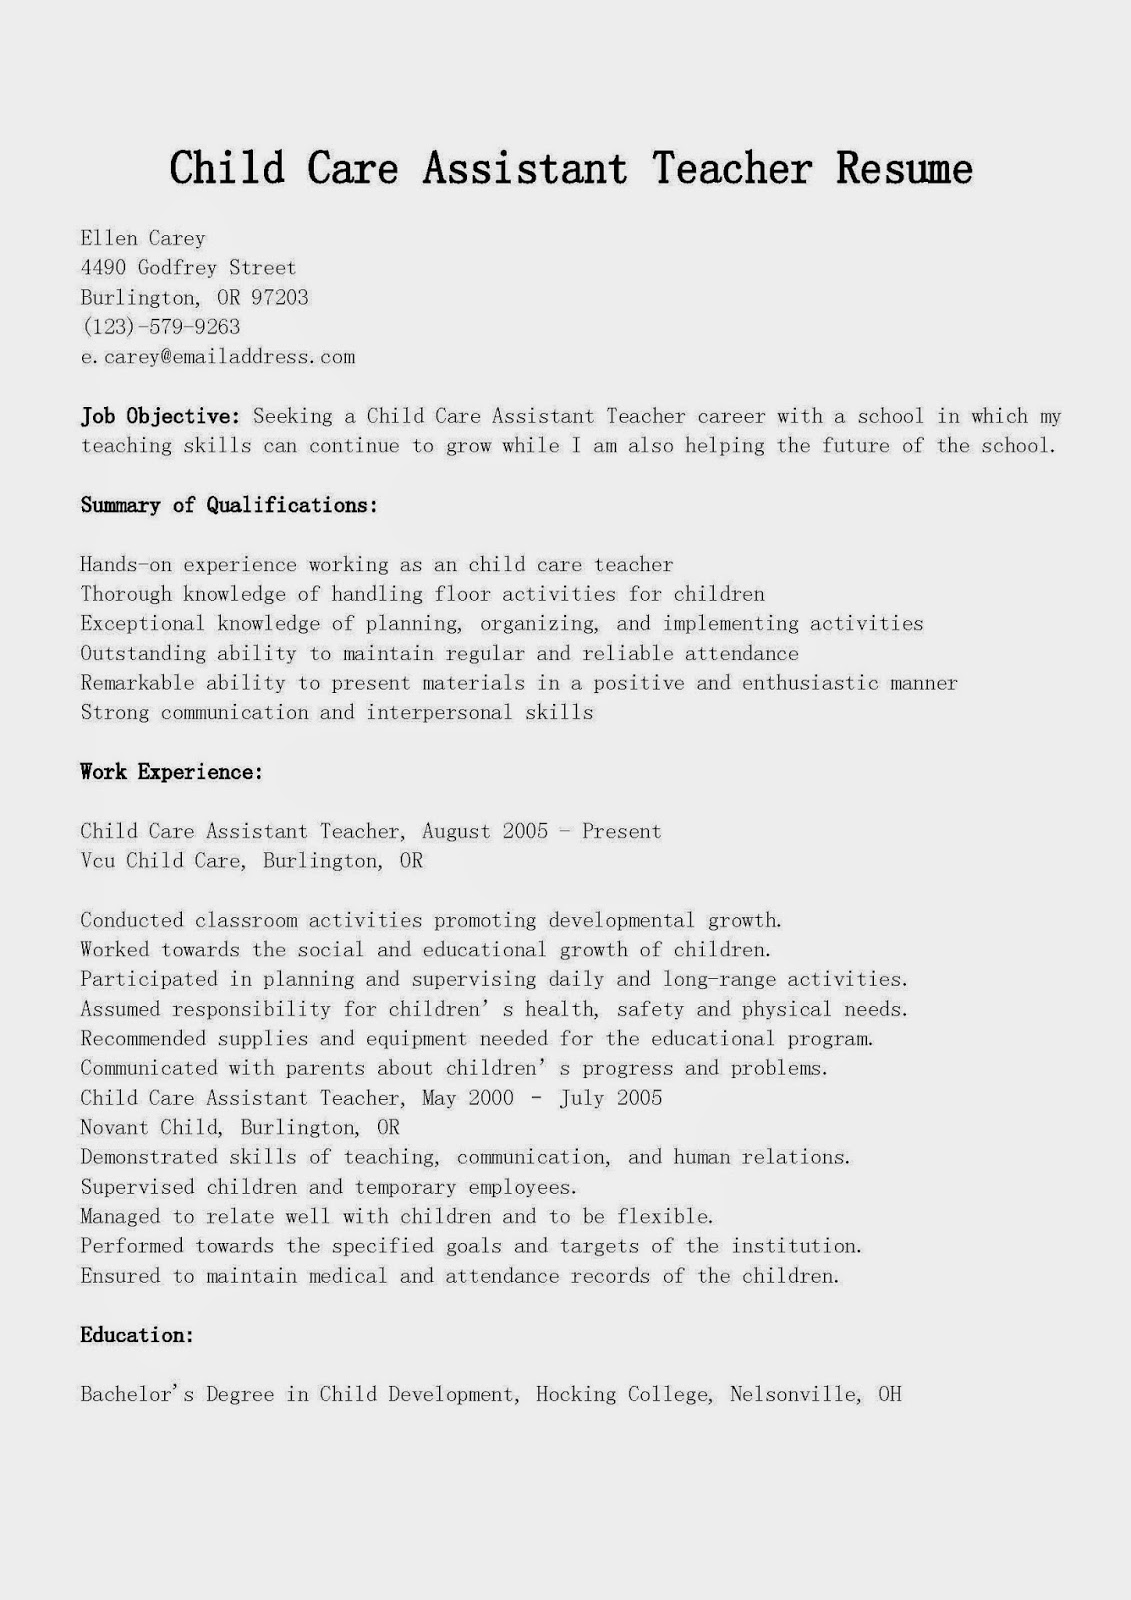 Assistance resume writing